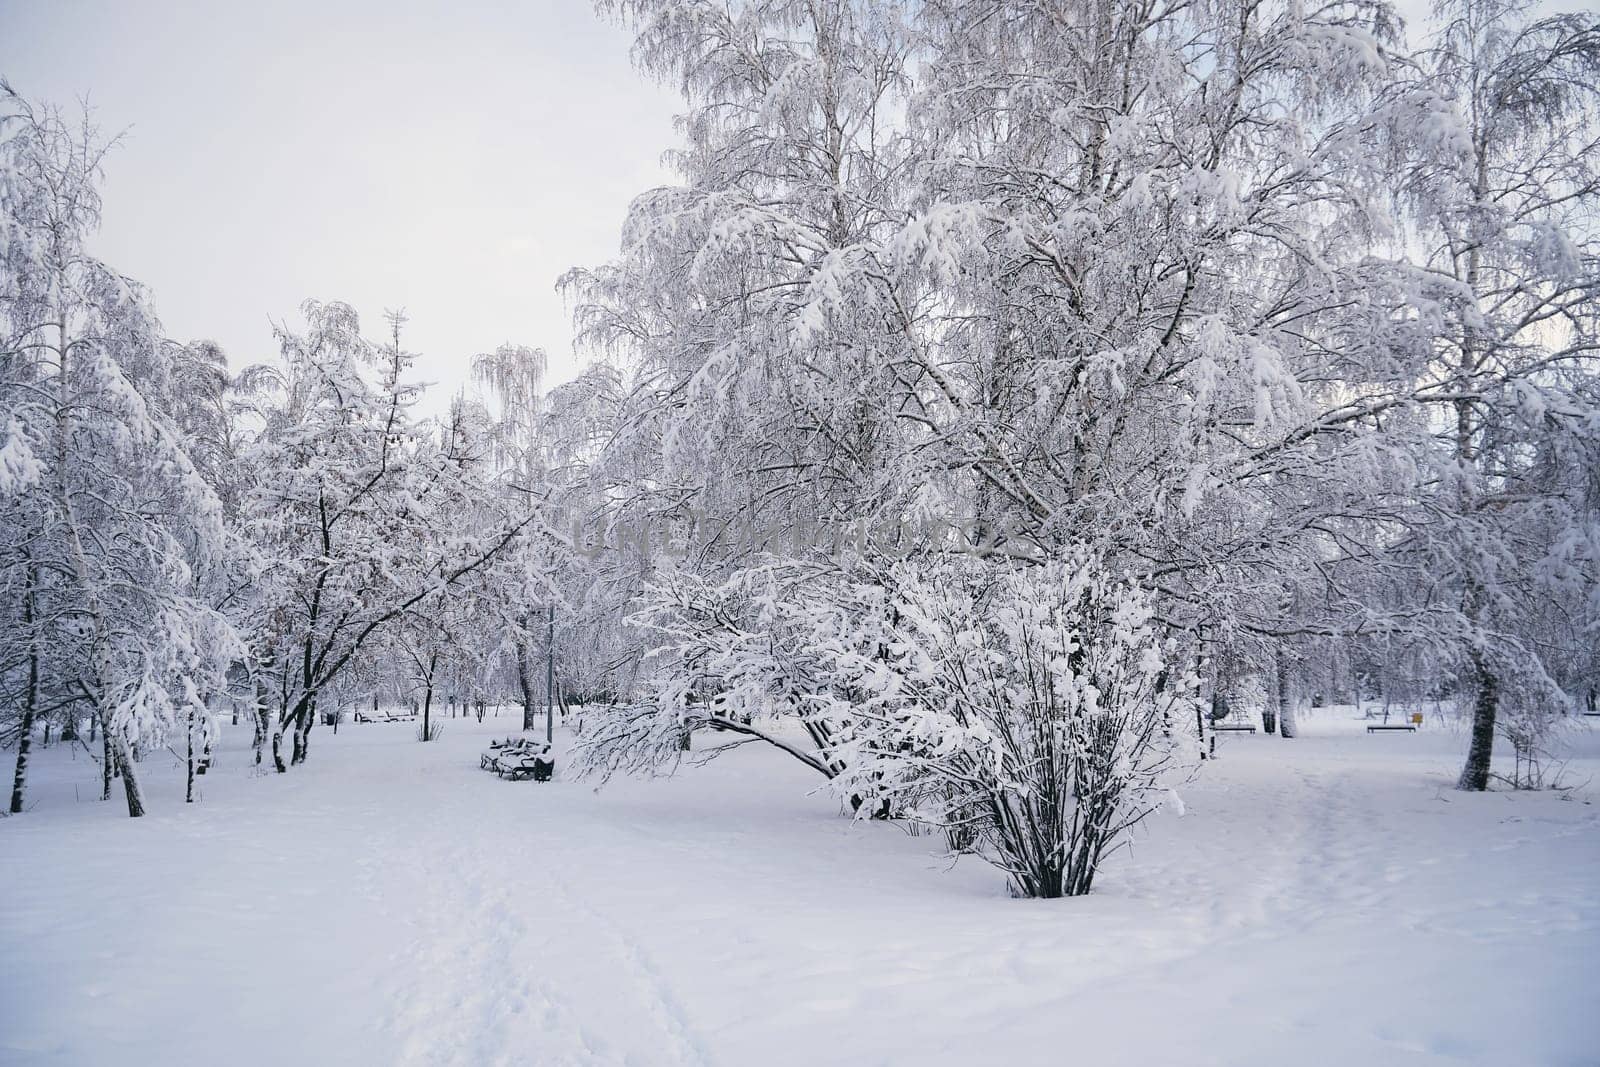 Beautiful winter landscape with snow-covered trees in a city park early in the morning